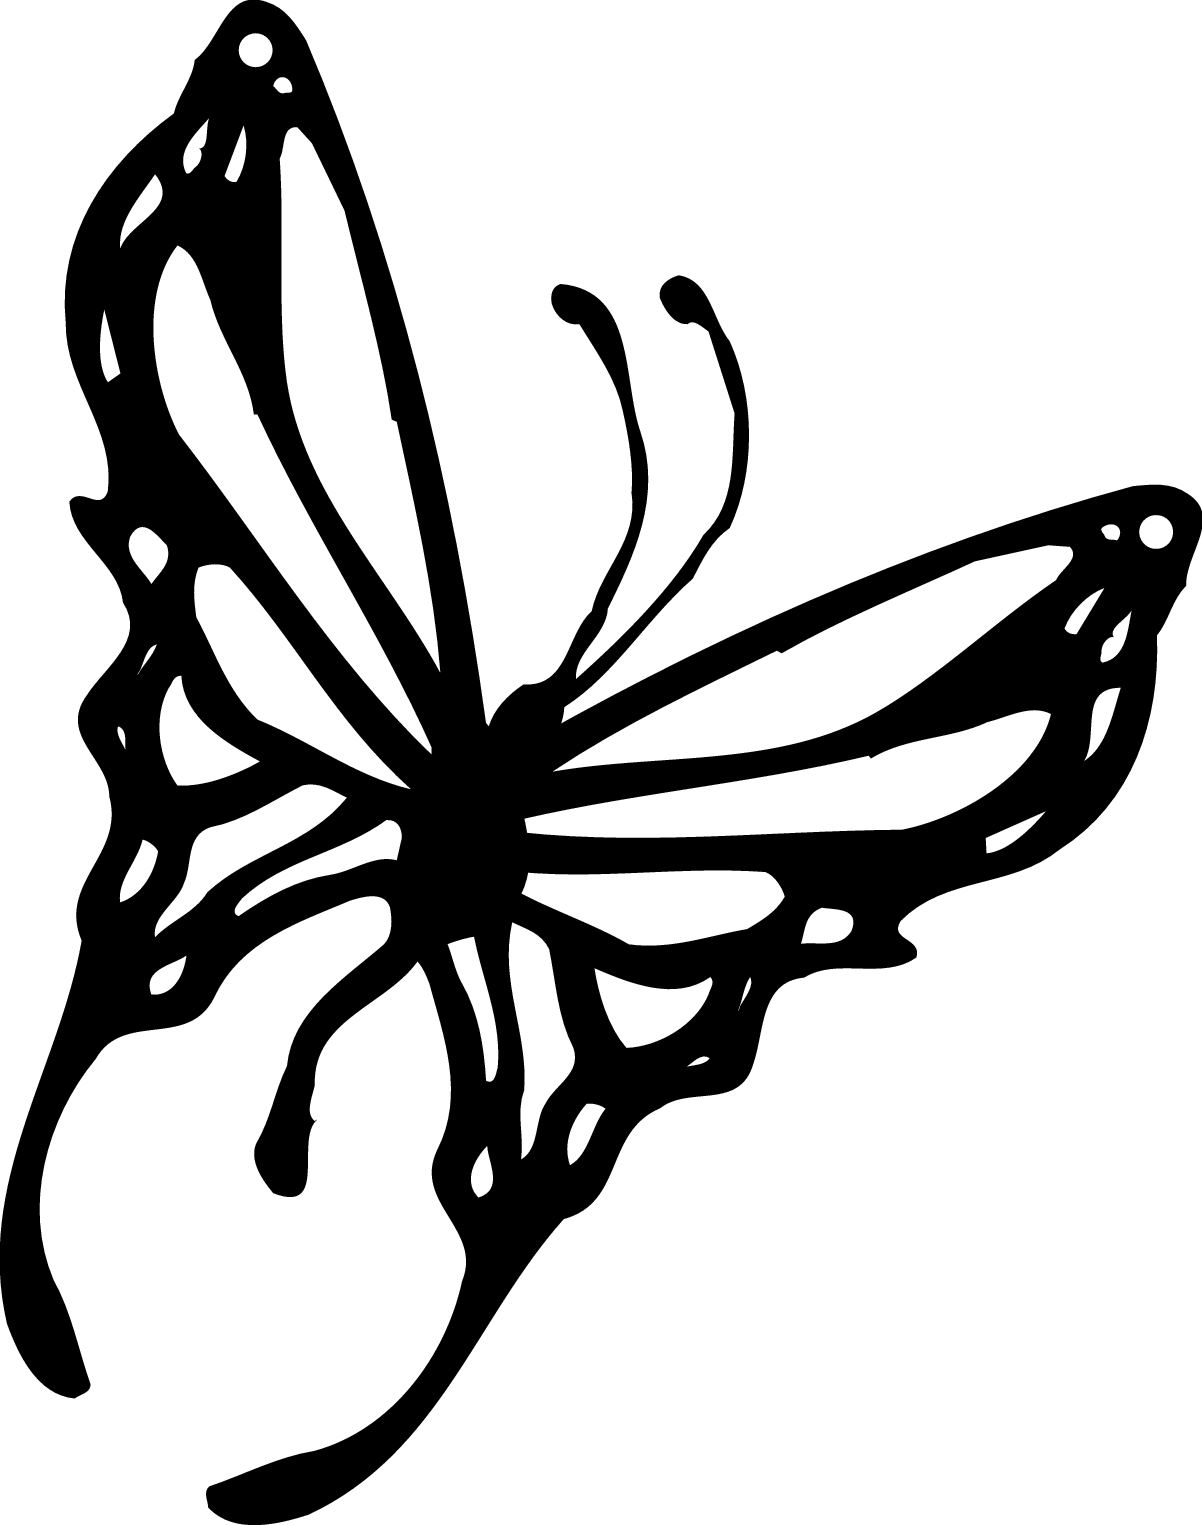 Butterfly Black And White Clip Art - Clipart library